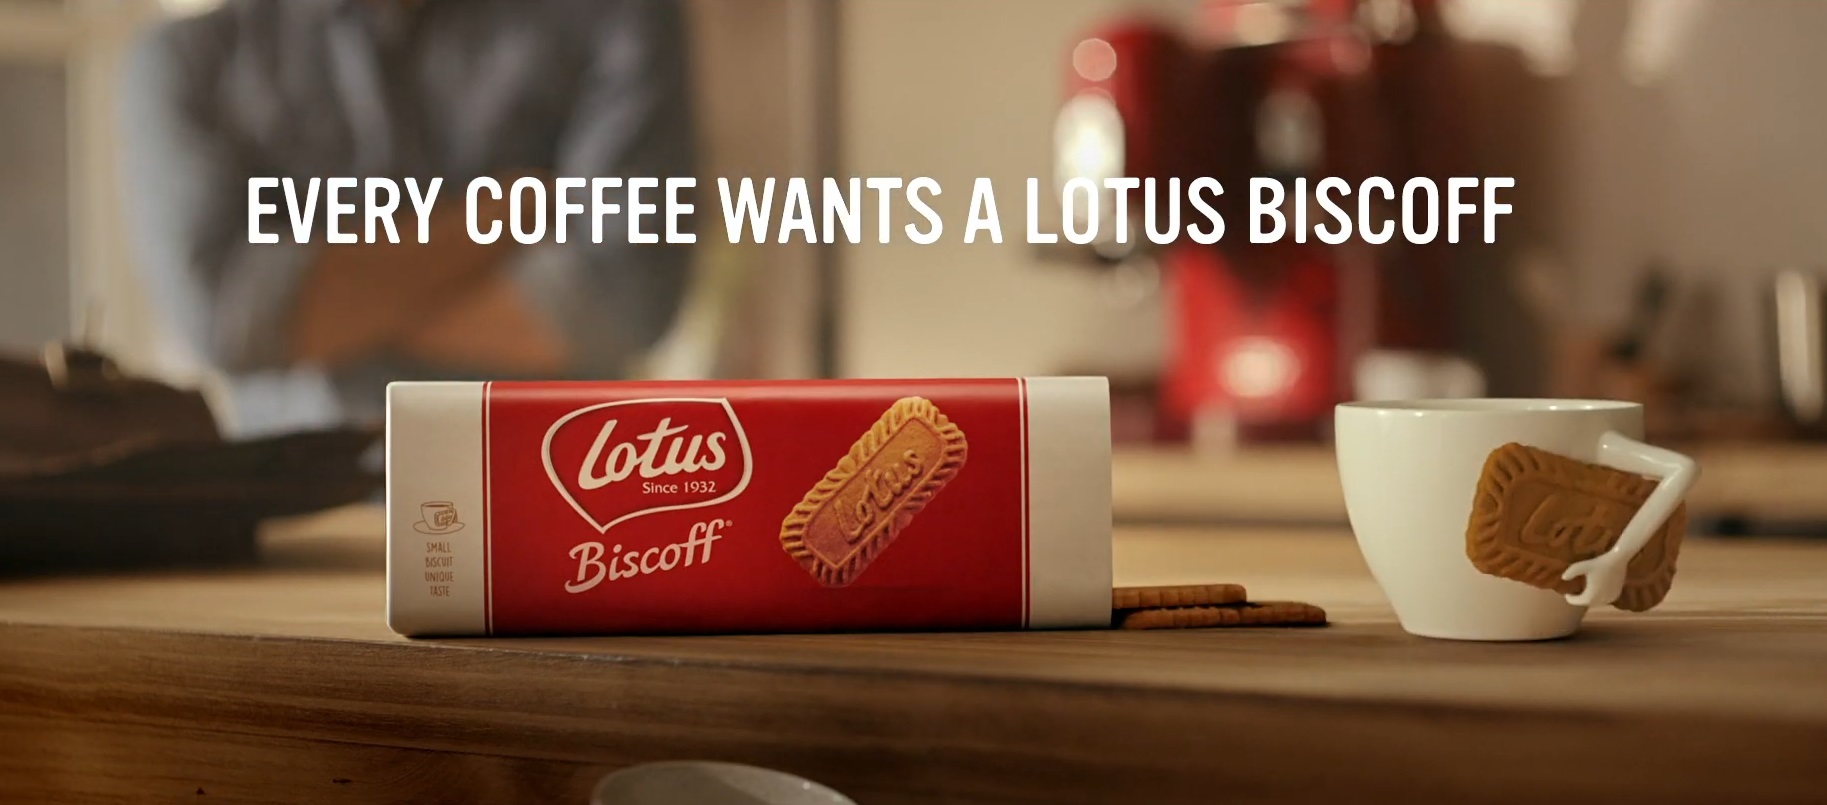 Lotus Biscoff Returns To Tv With New Advert 1443